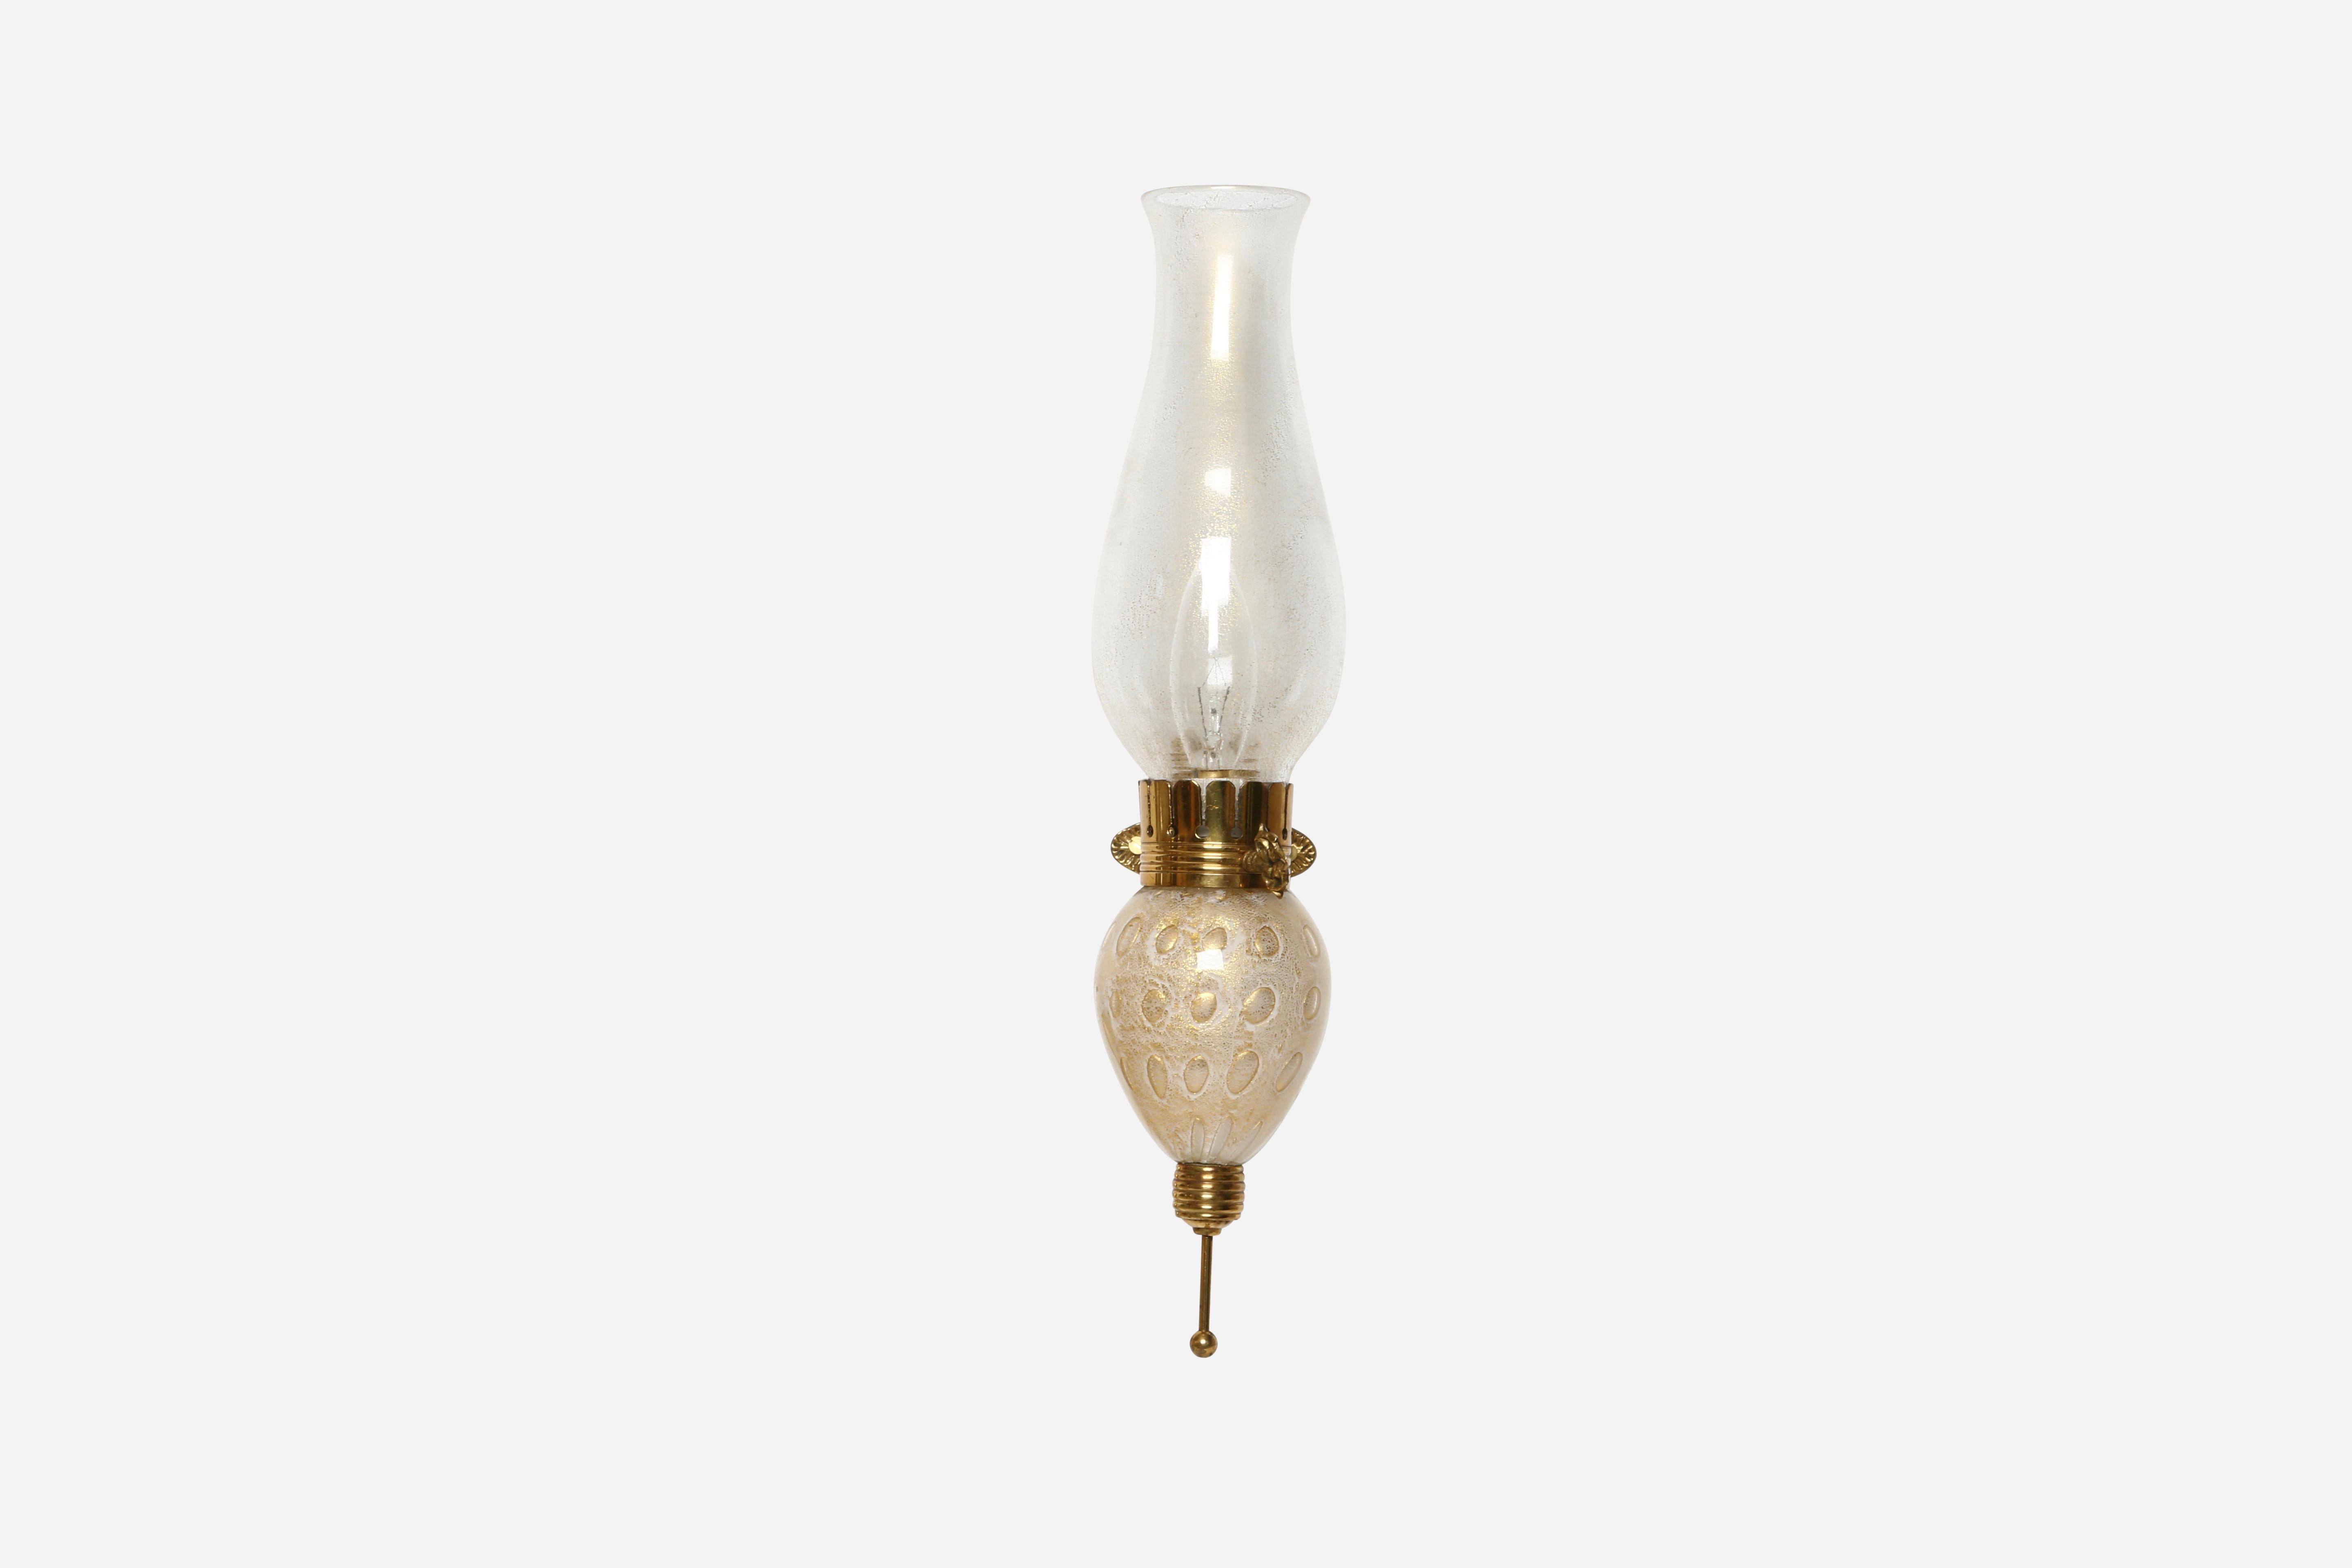 Murano sconce by Seguso.
Exquisite hand blown glass with gold infusions.
Made in Italy in 1940s
Take 1 candelabra bulb 
Complimentary US rewiring with a custom backplate upon request.

At Illustris Lighting our main focus is to deliver lighting